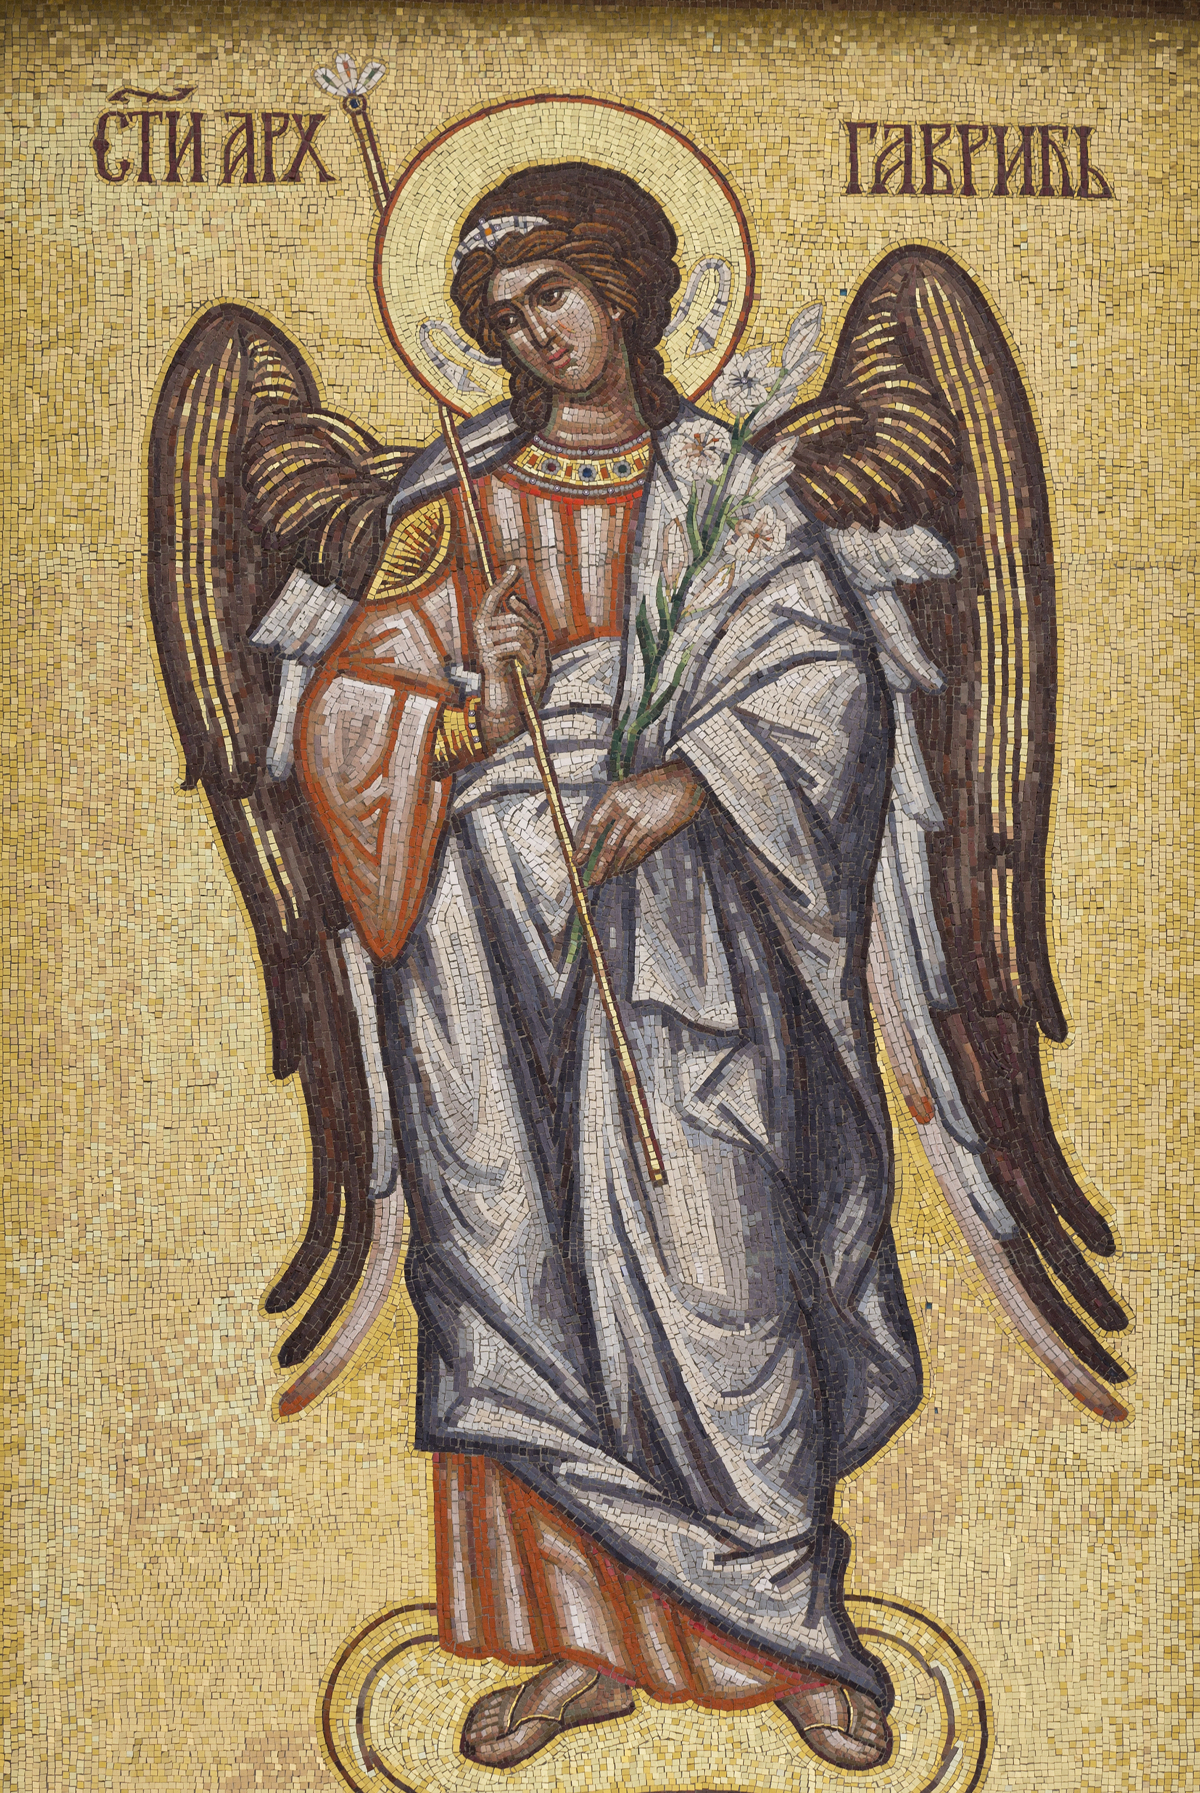 Religious Tidings: Who are the Archangels and What Do They Do?
